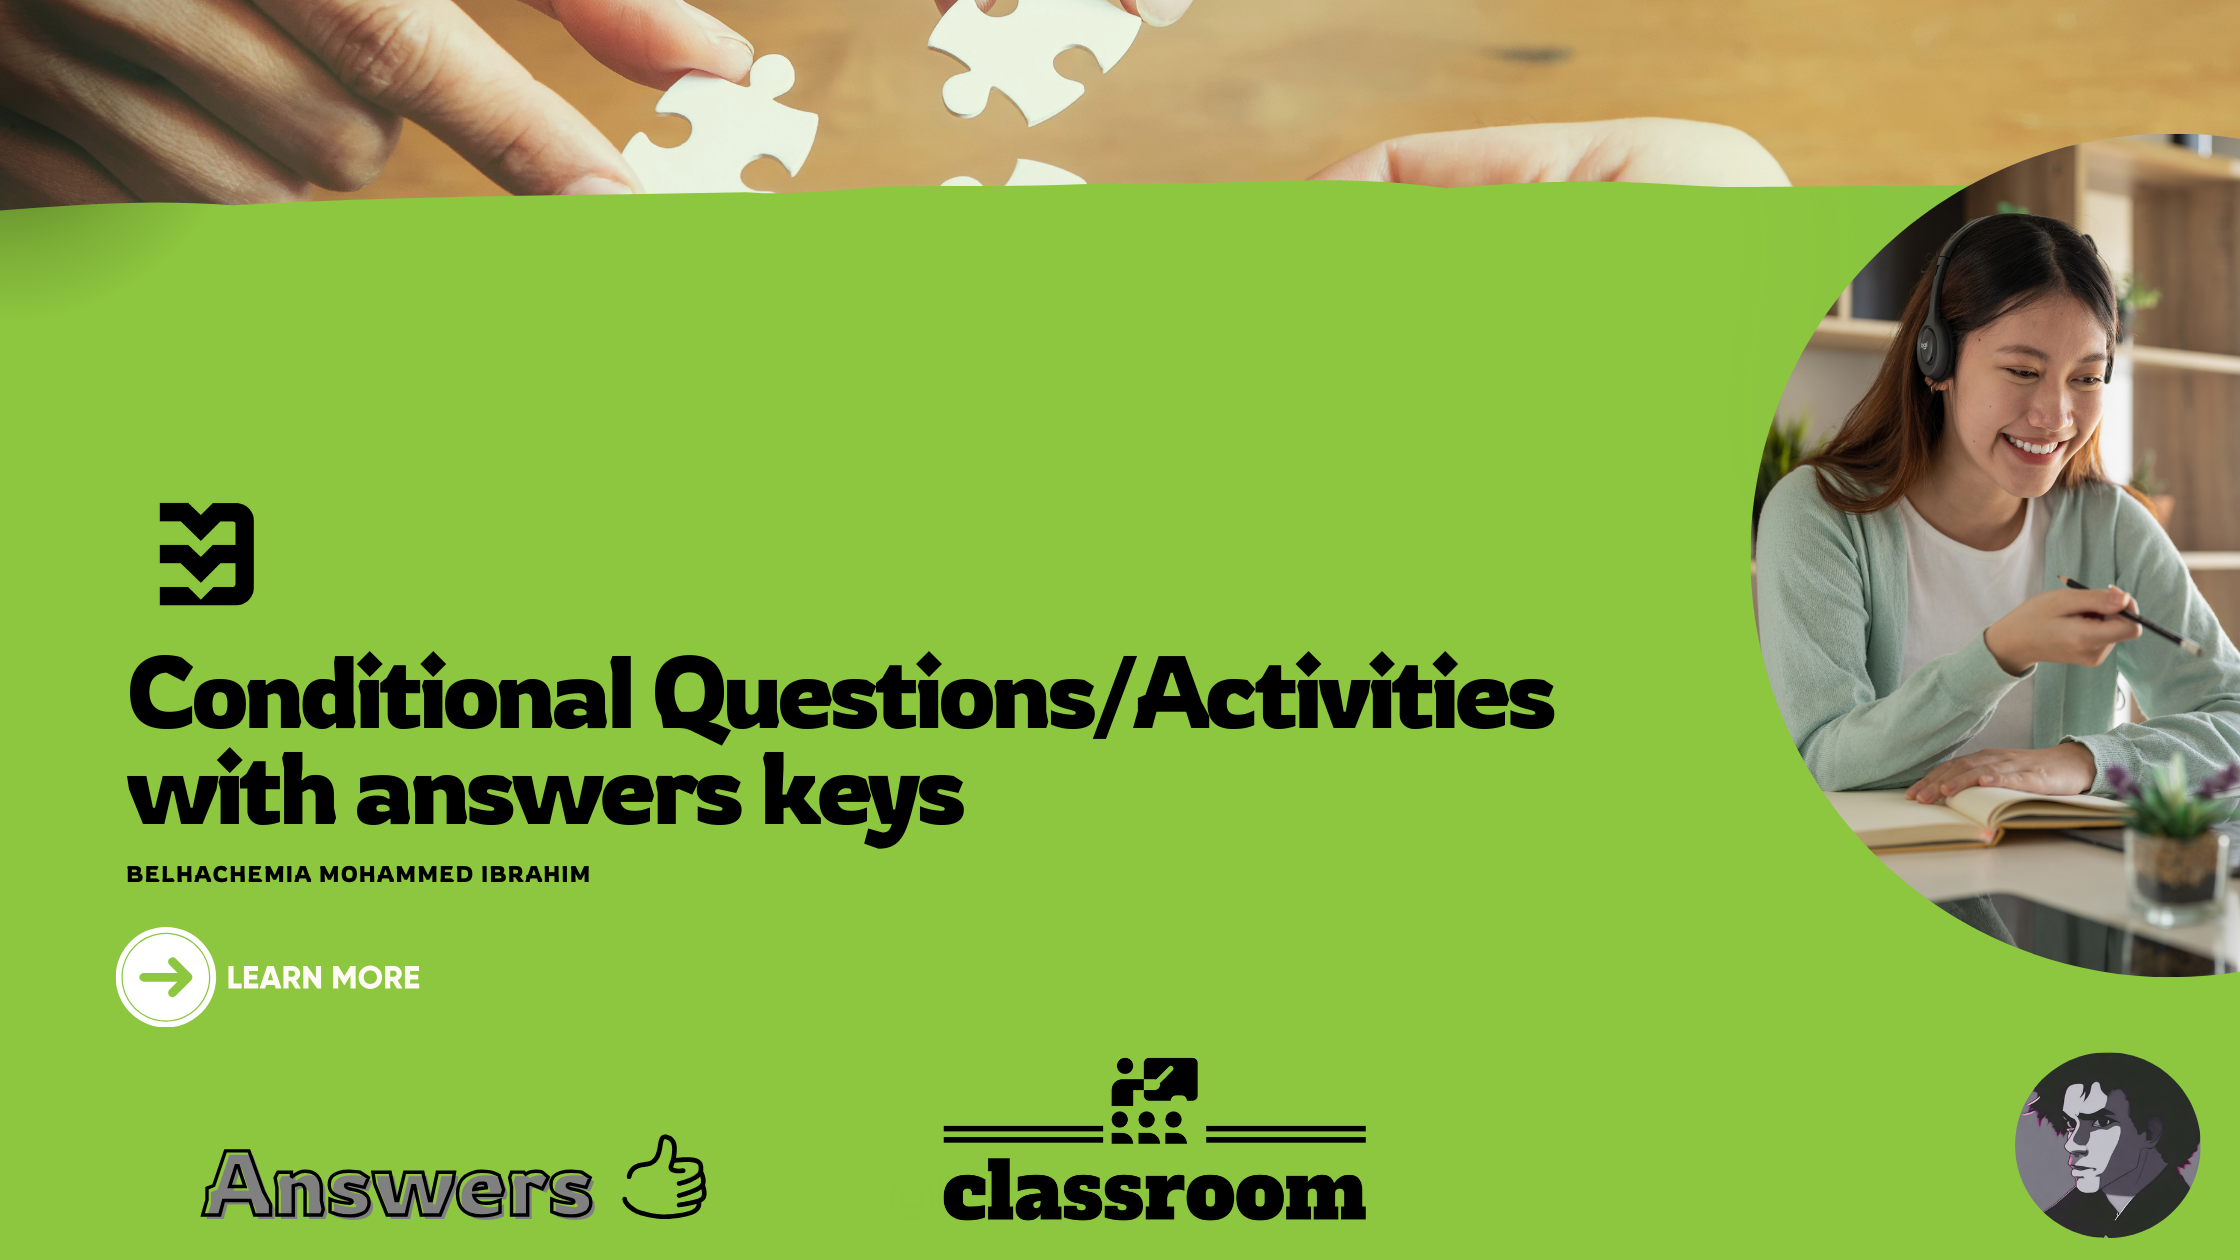 Conditional Questions/Activities with answer keys